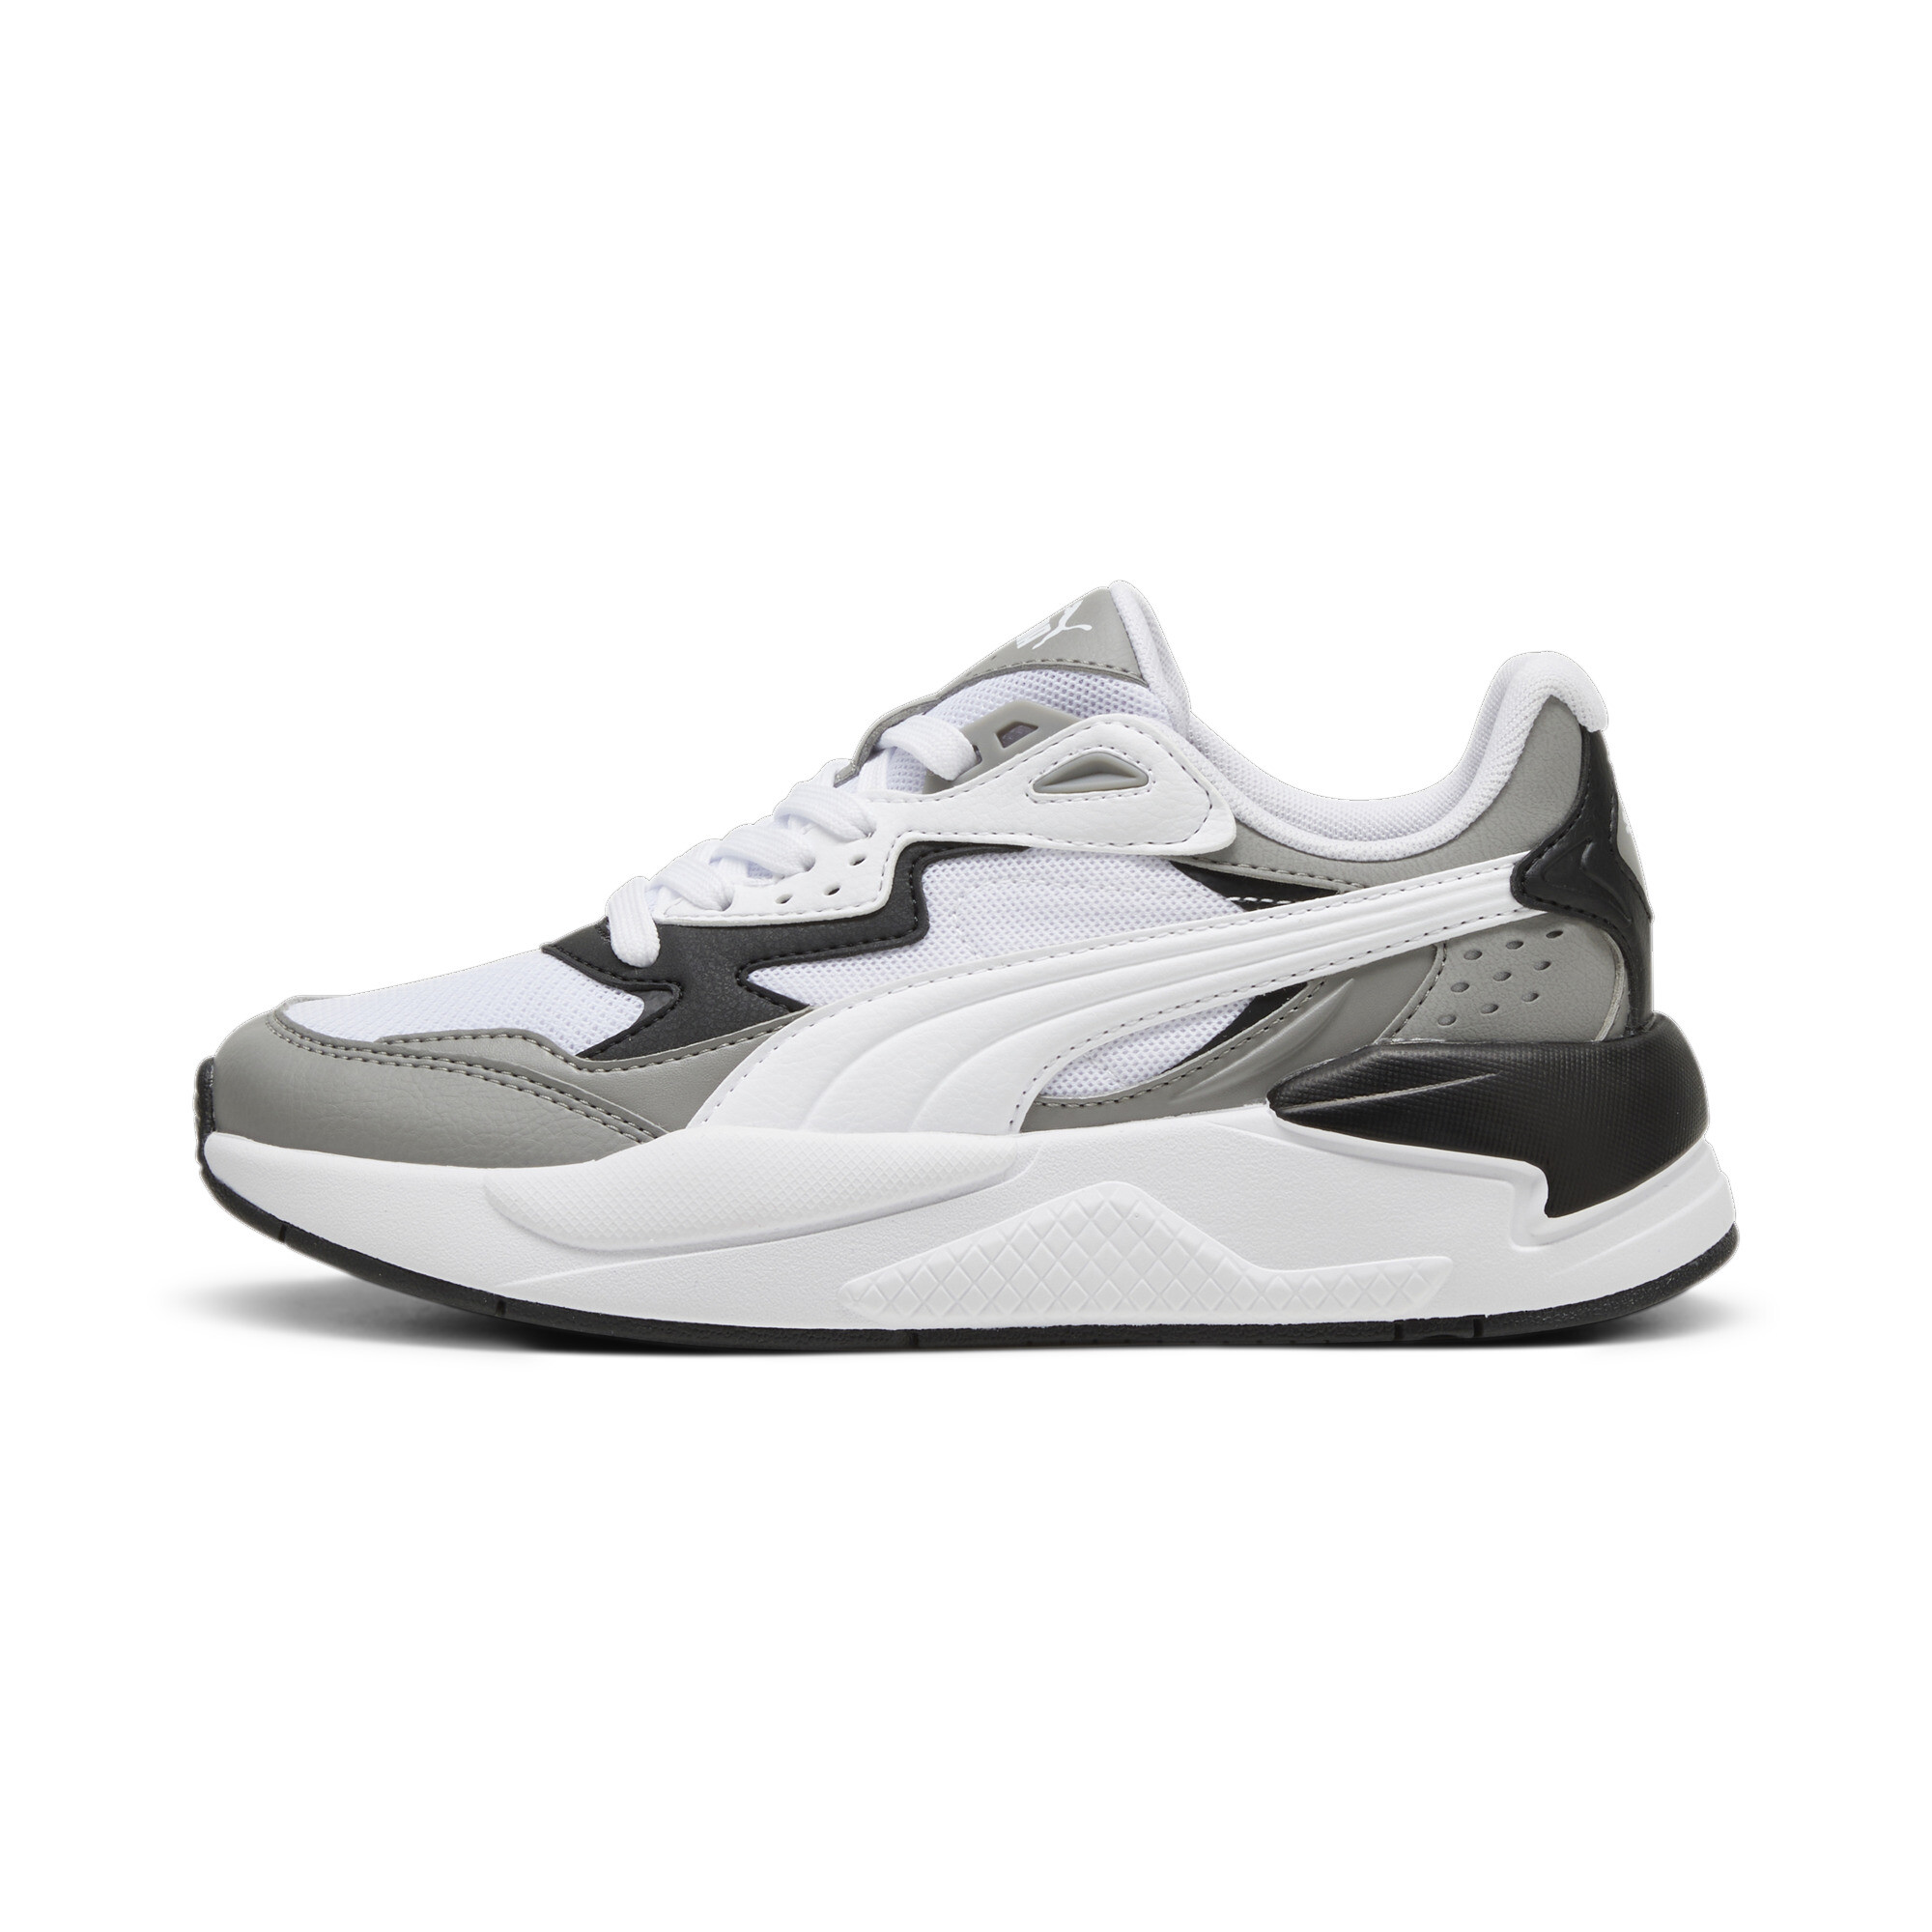 Puma X-Ray Speed Youth Trainers, Gray, Size 38, Shoes